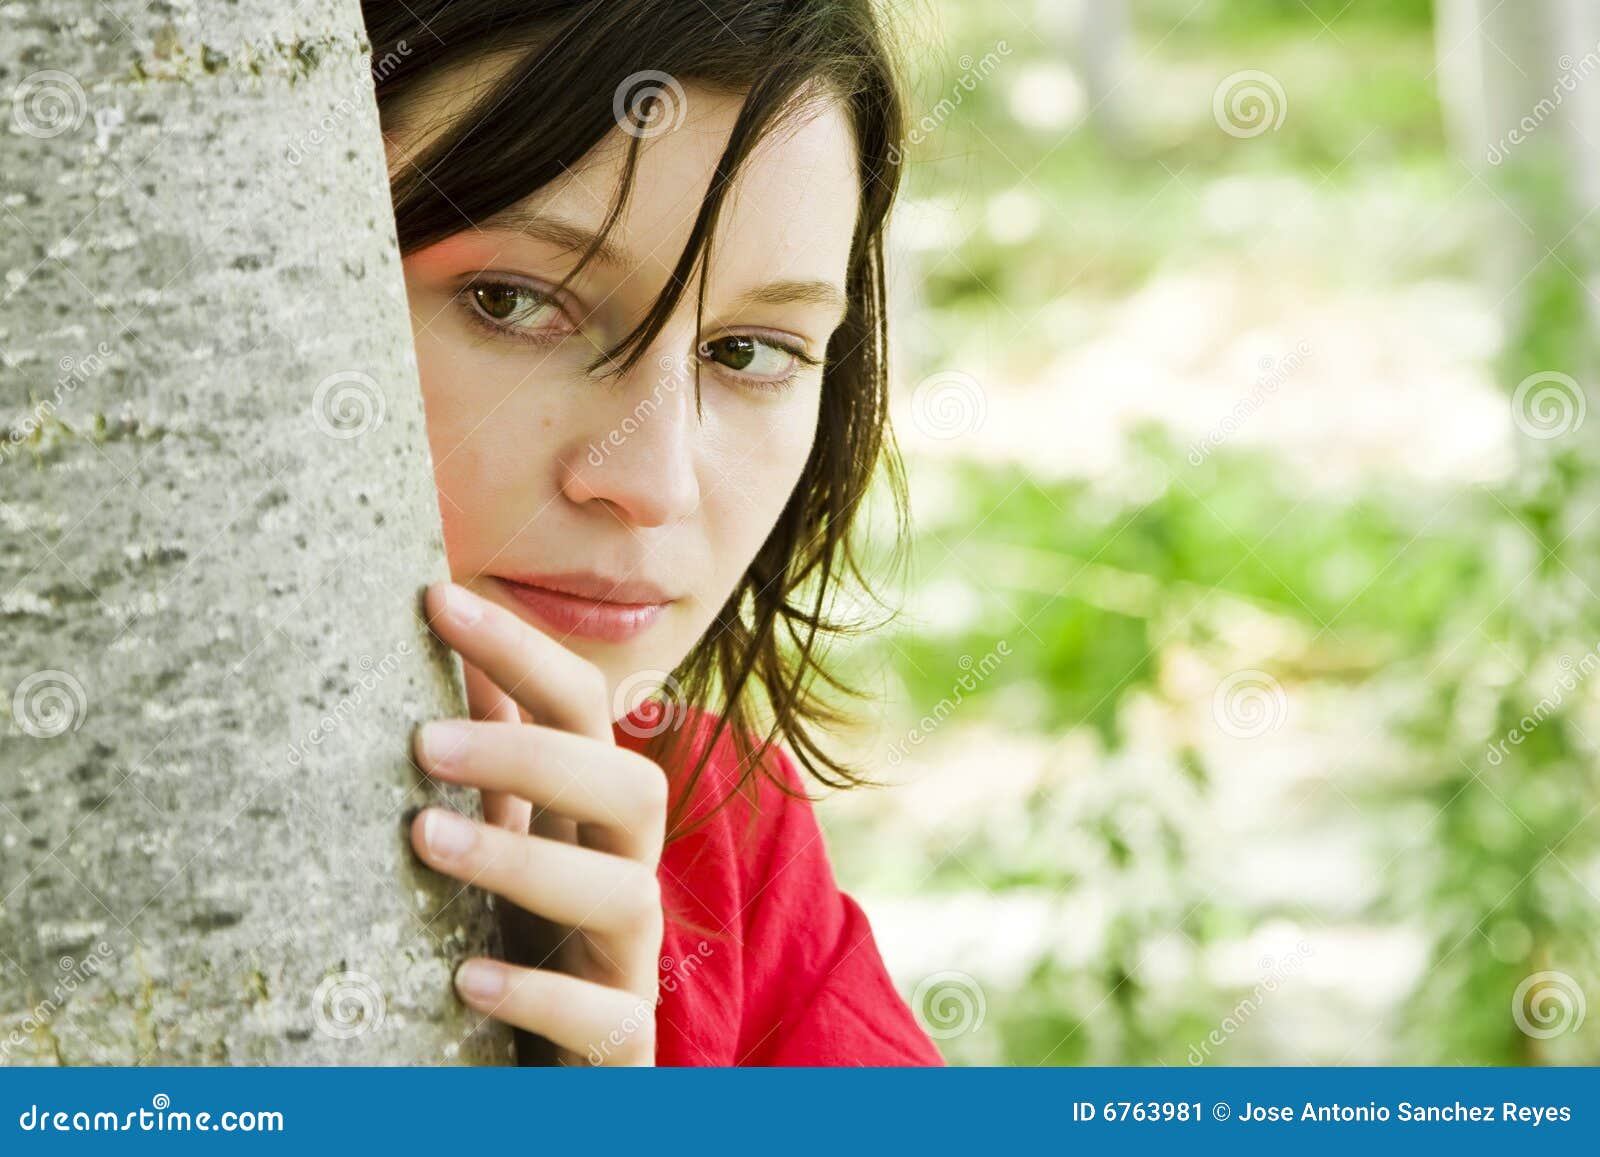 young woman playing hide and seek